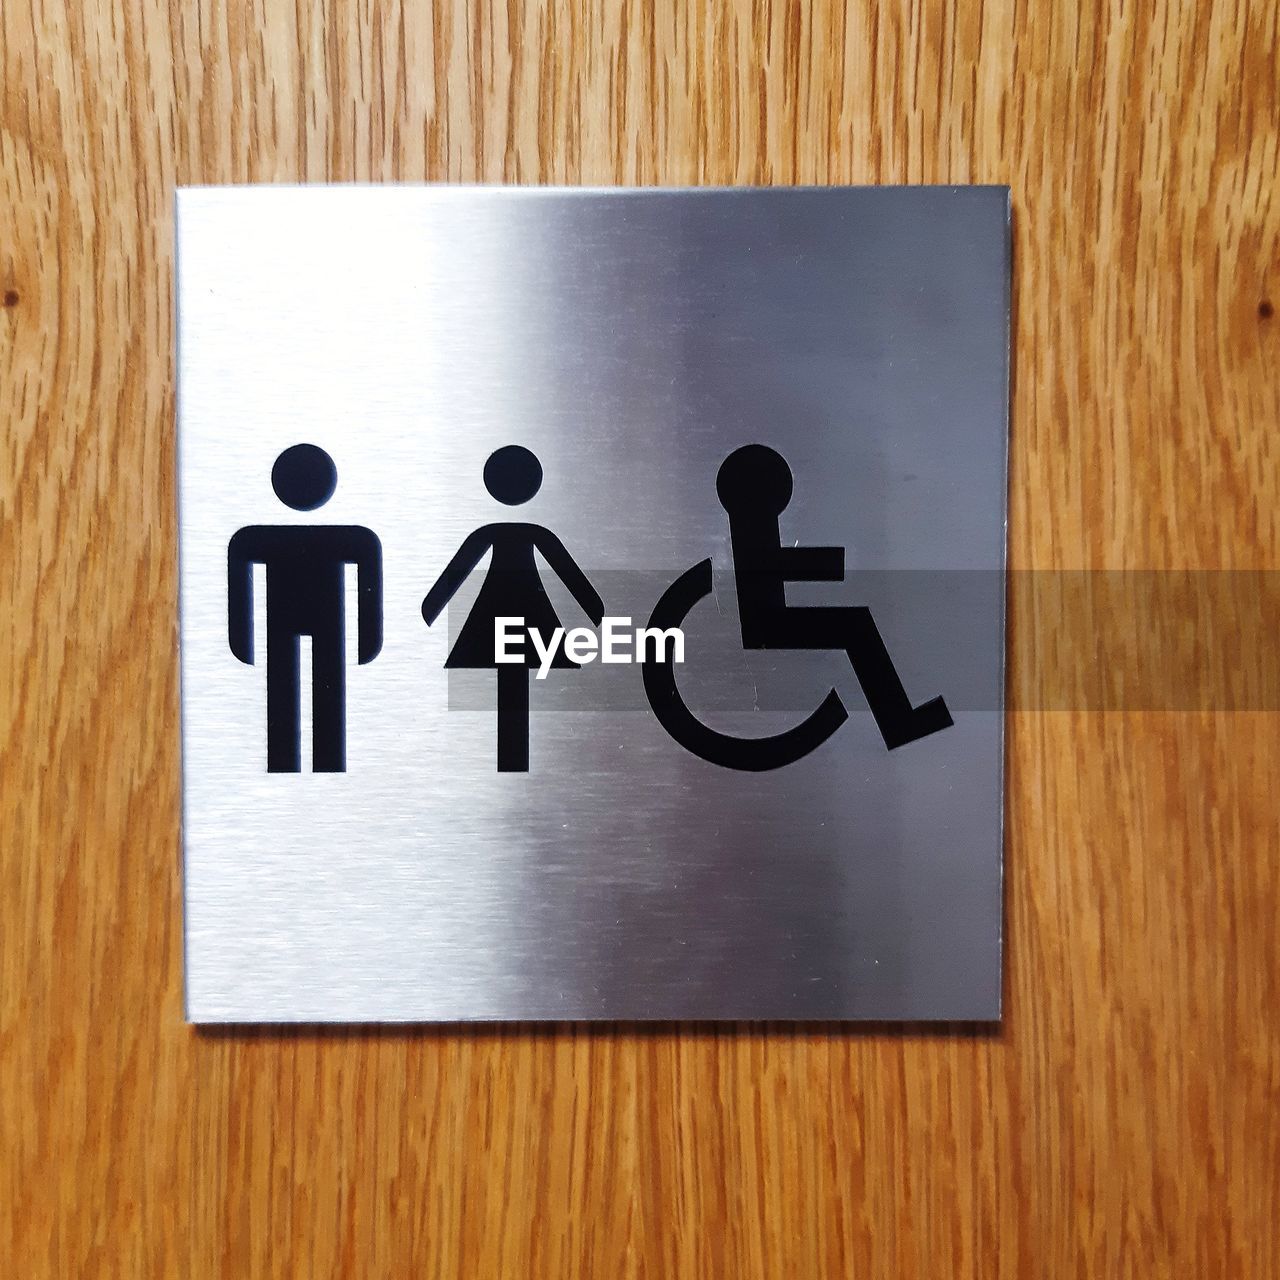 wood, communication, sign, human representation, indoors, font, restroom sign, public building, public restroom, representation, disabled access, differing abilities, no people, text, number, close-up, logo, symbol, disabled sign